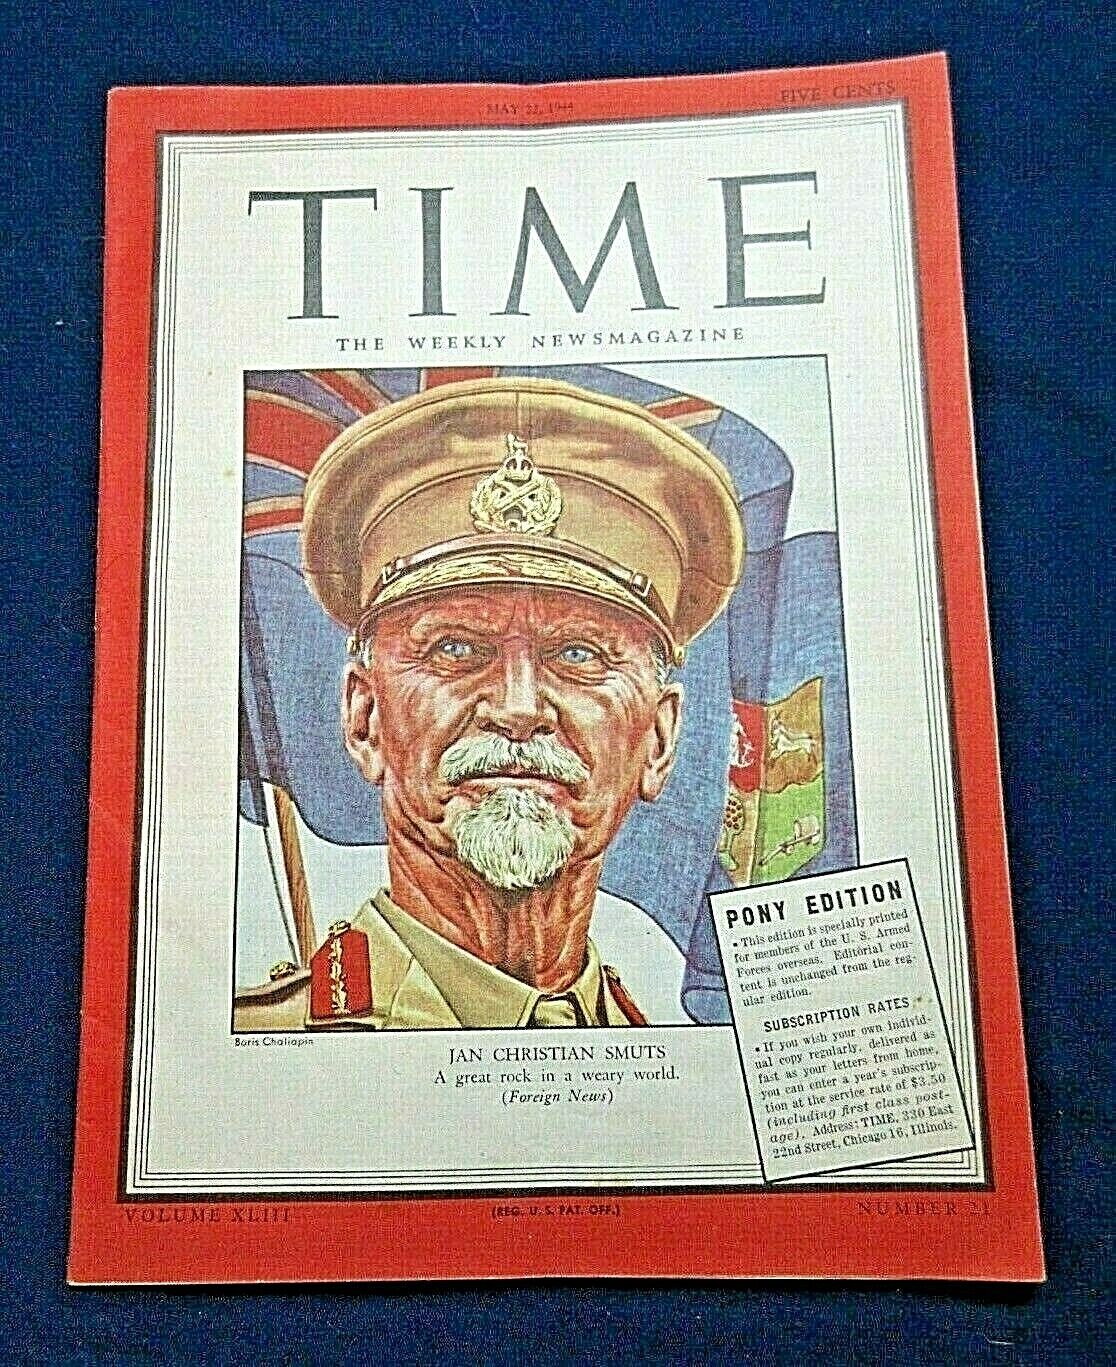 WWII - May 12 1944 TIME MAGAZINE - Pony Edition - Jan Christian Smuts